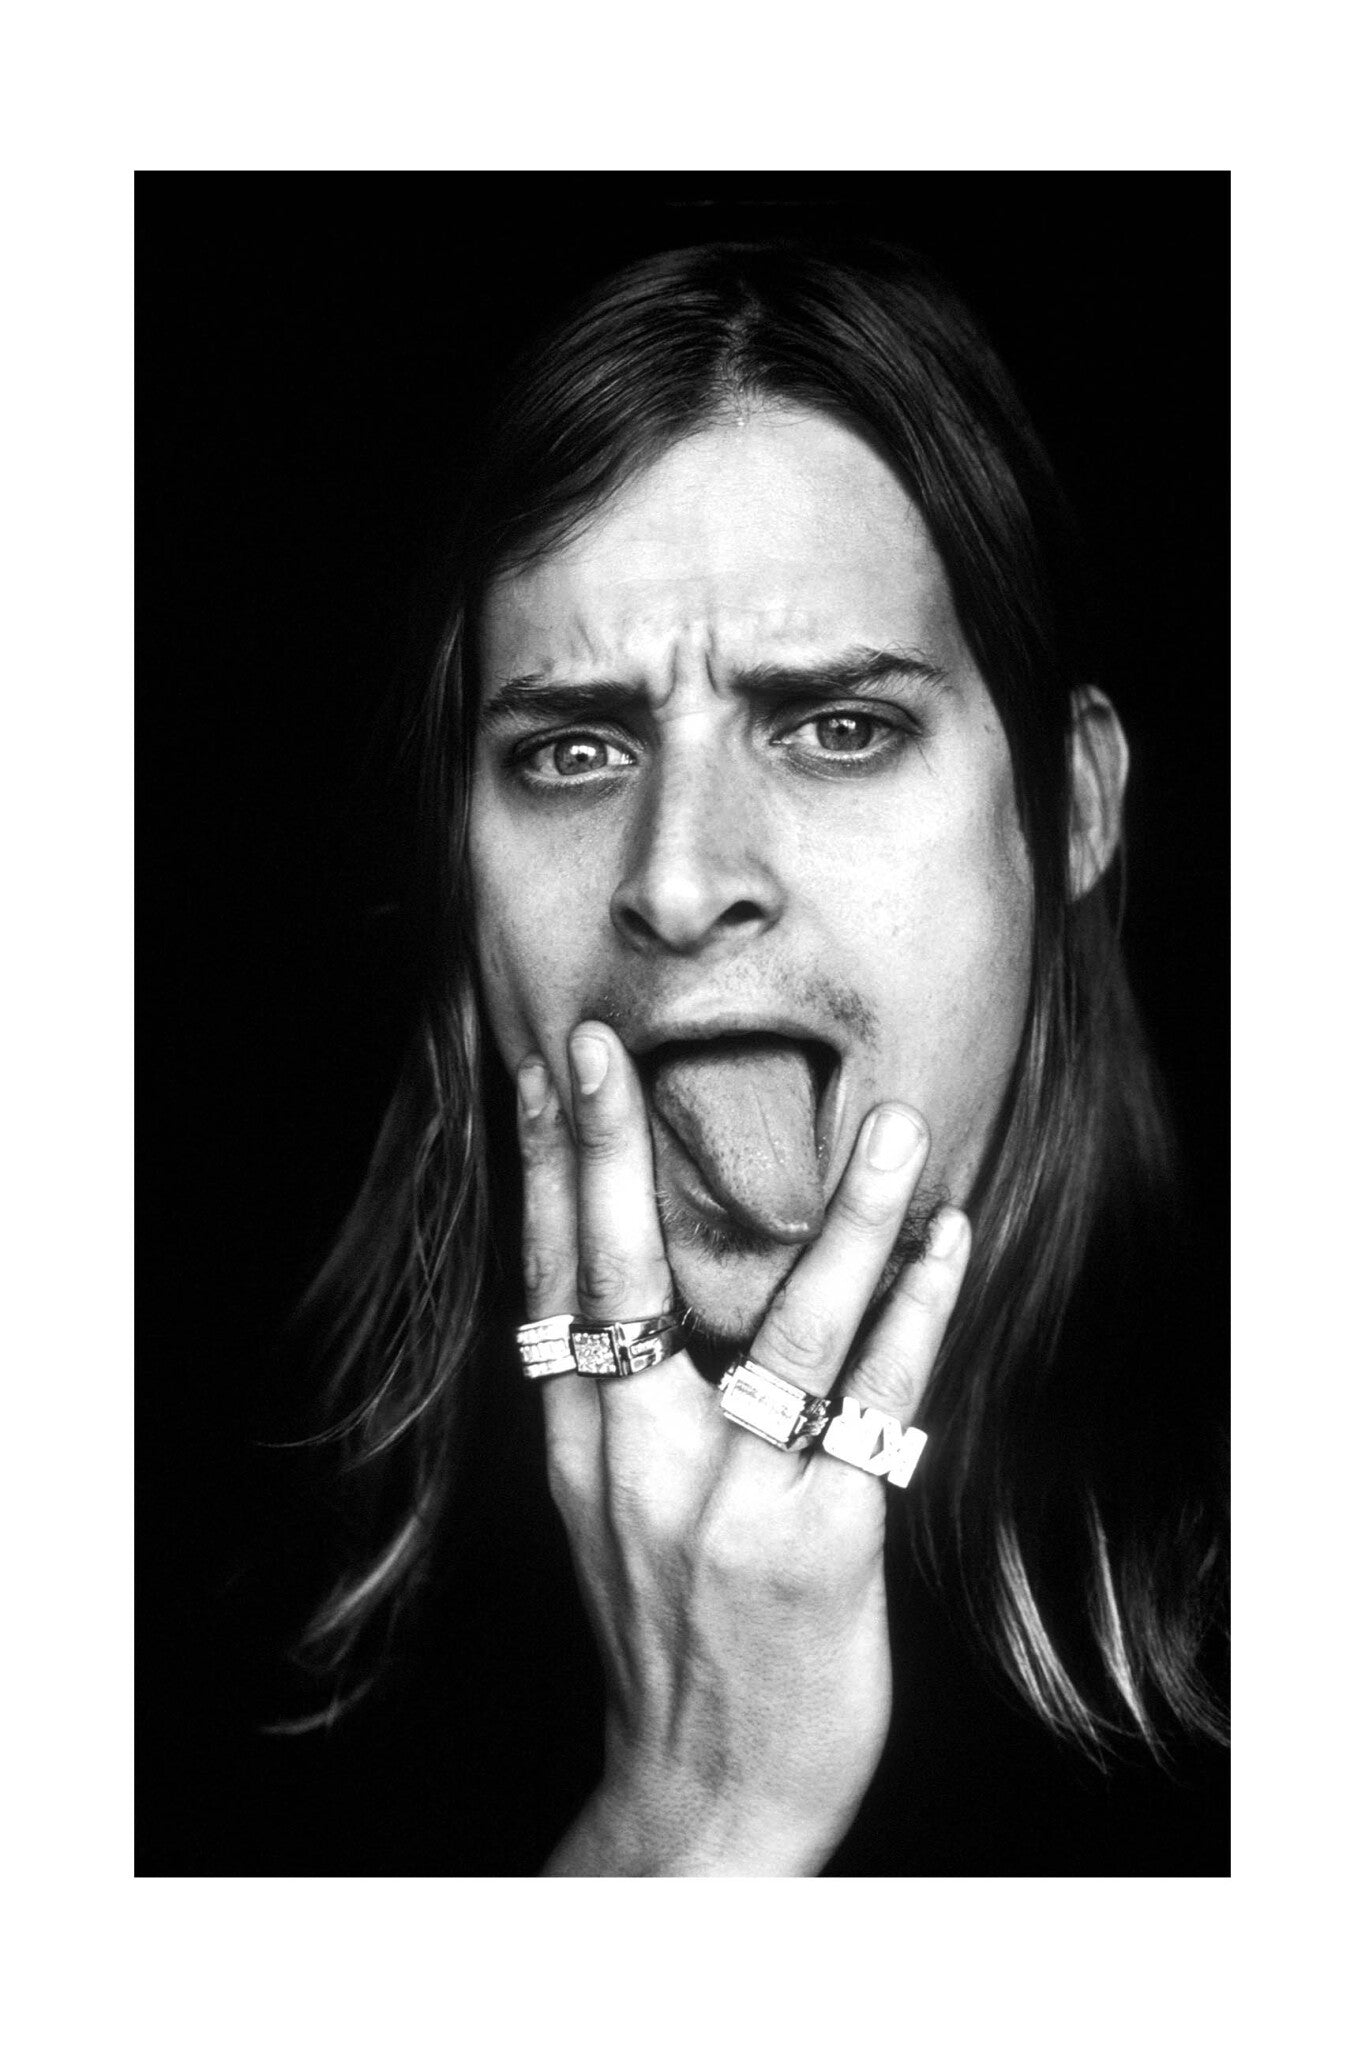 Kid Rock - With His Tongue Out, England, 1998 Print (1/7)